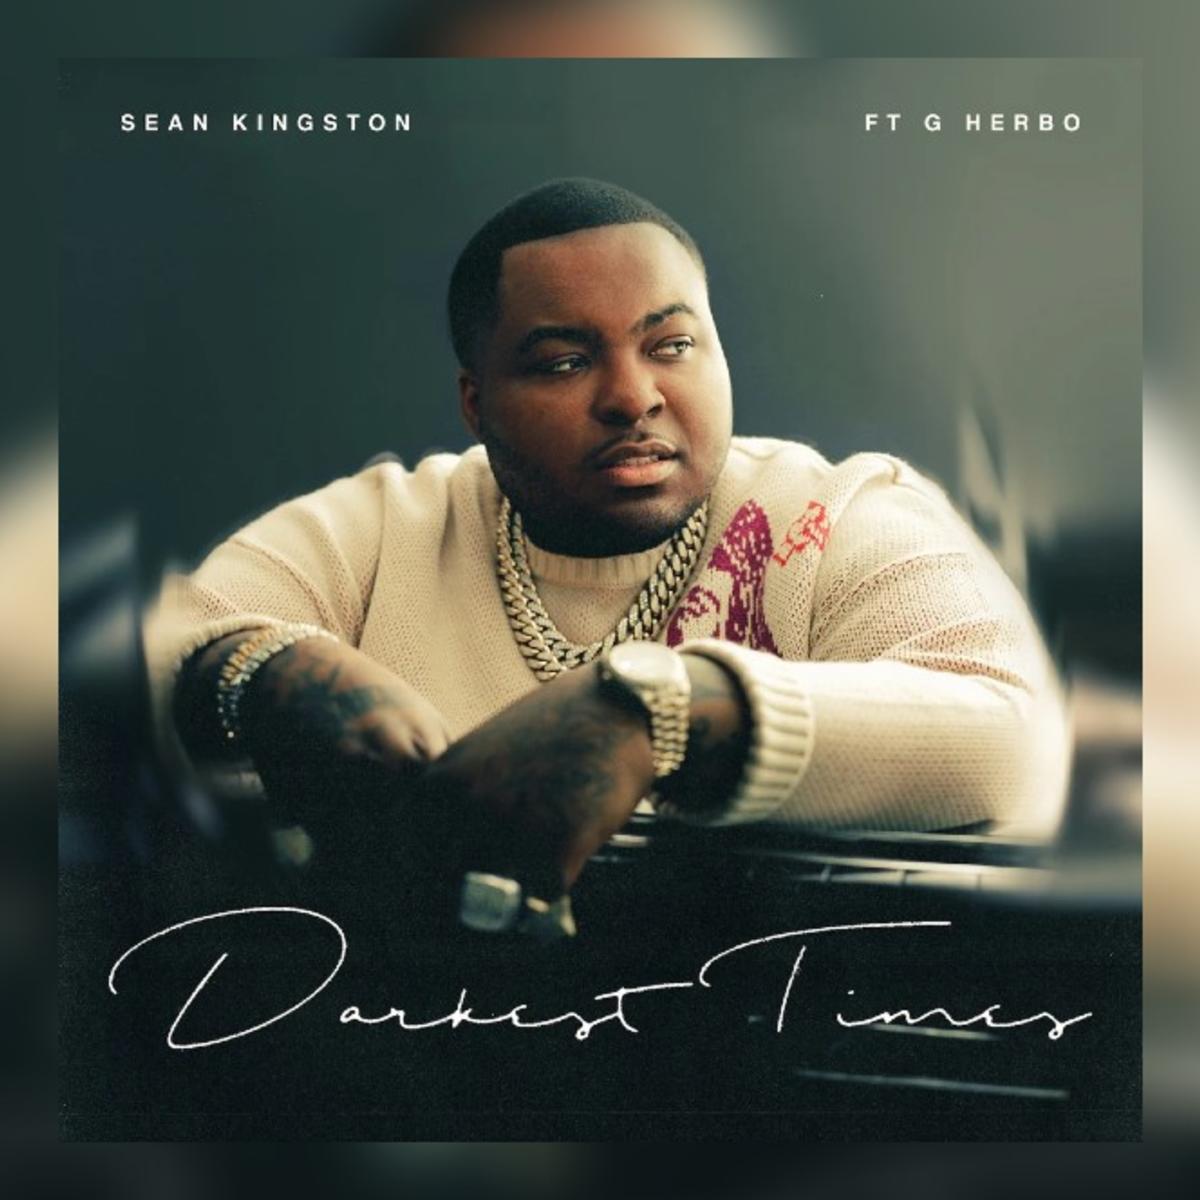 Sean Kingston Returns With “Darkest Times” With G-Herbo